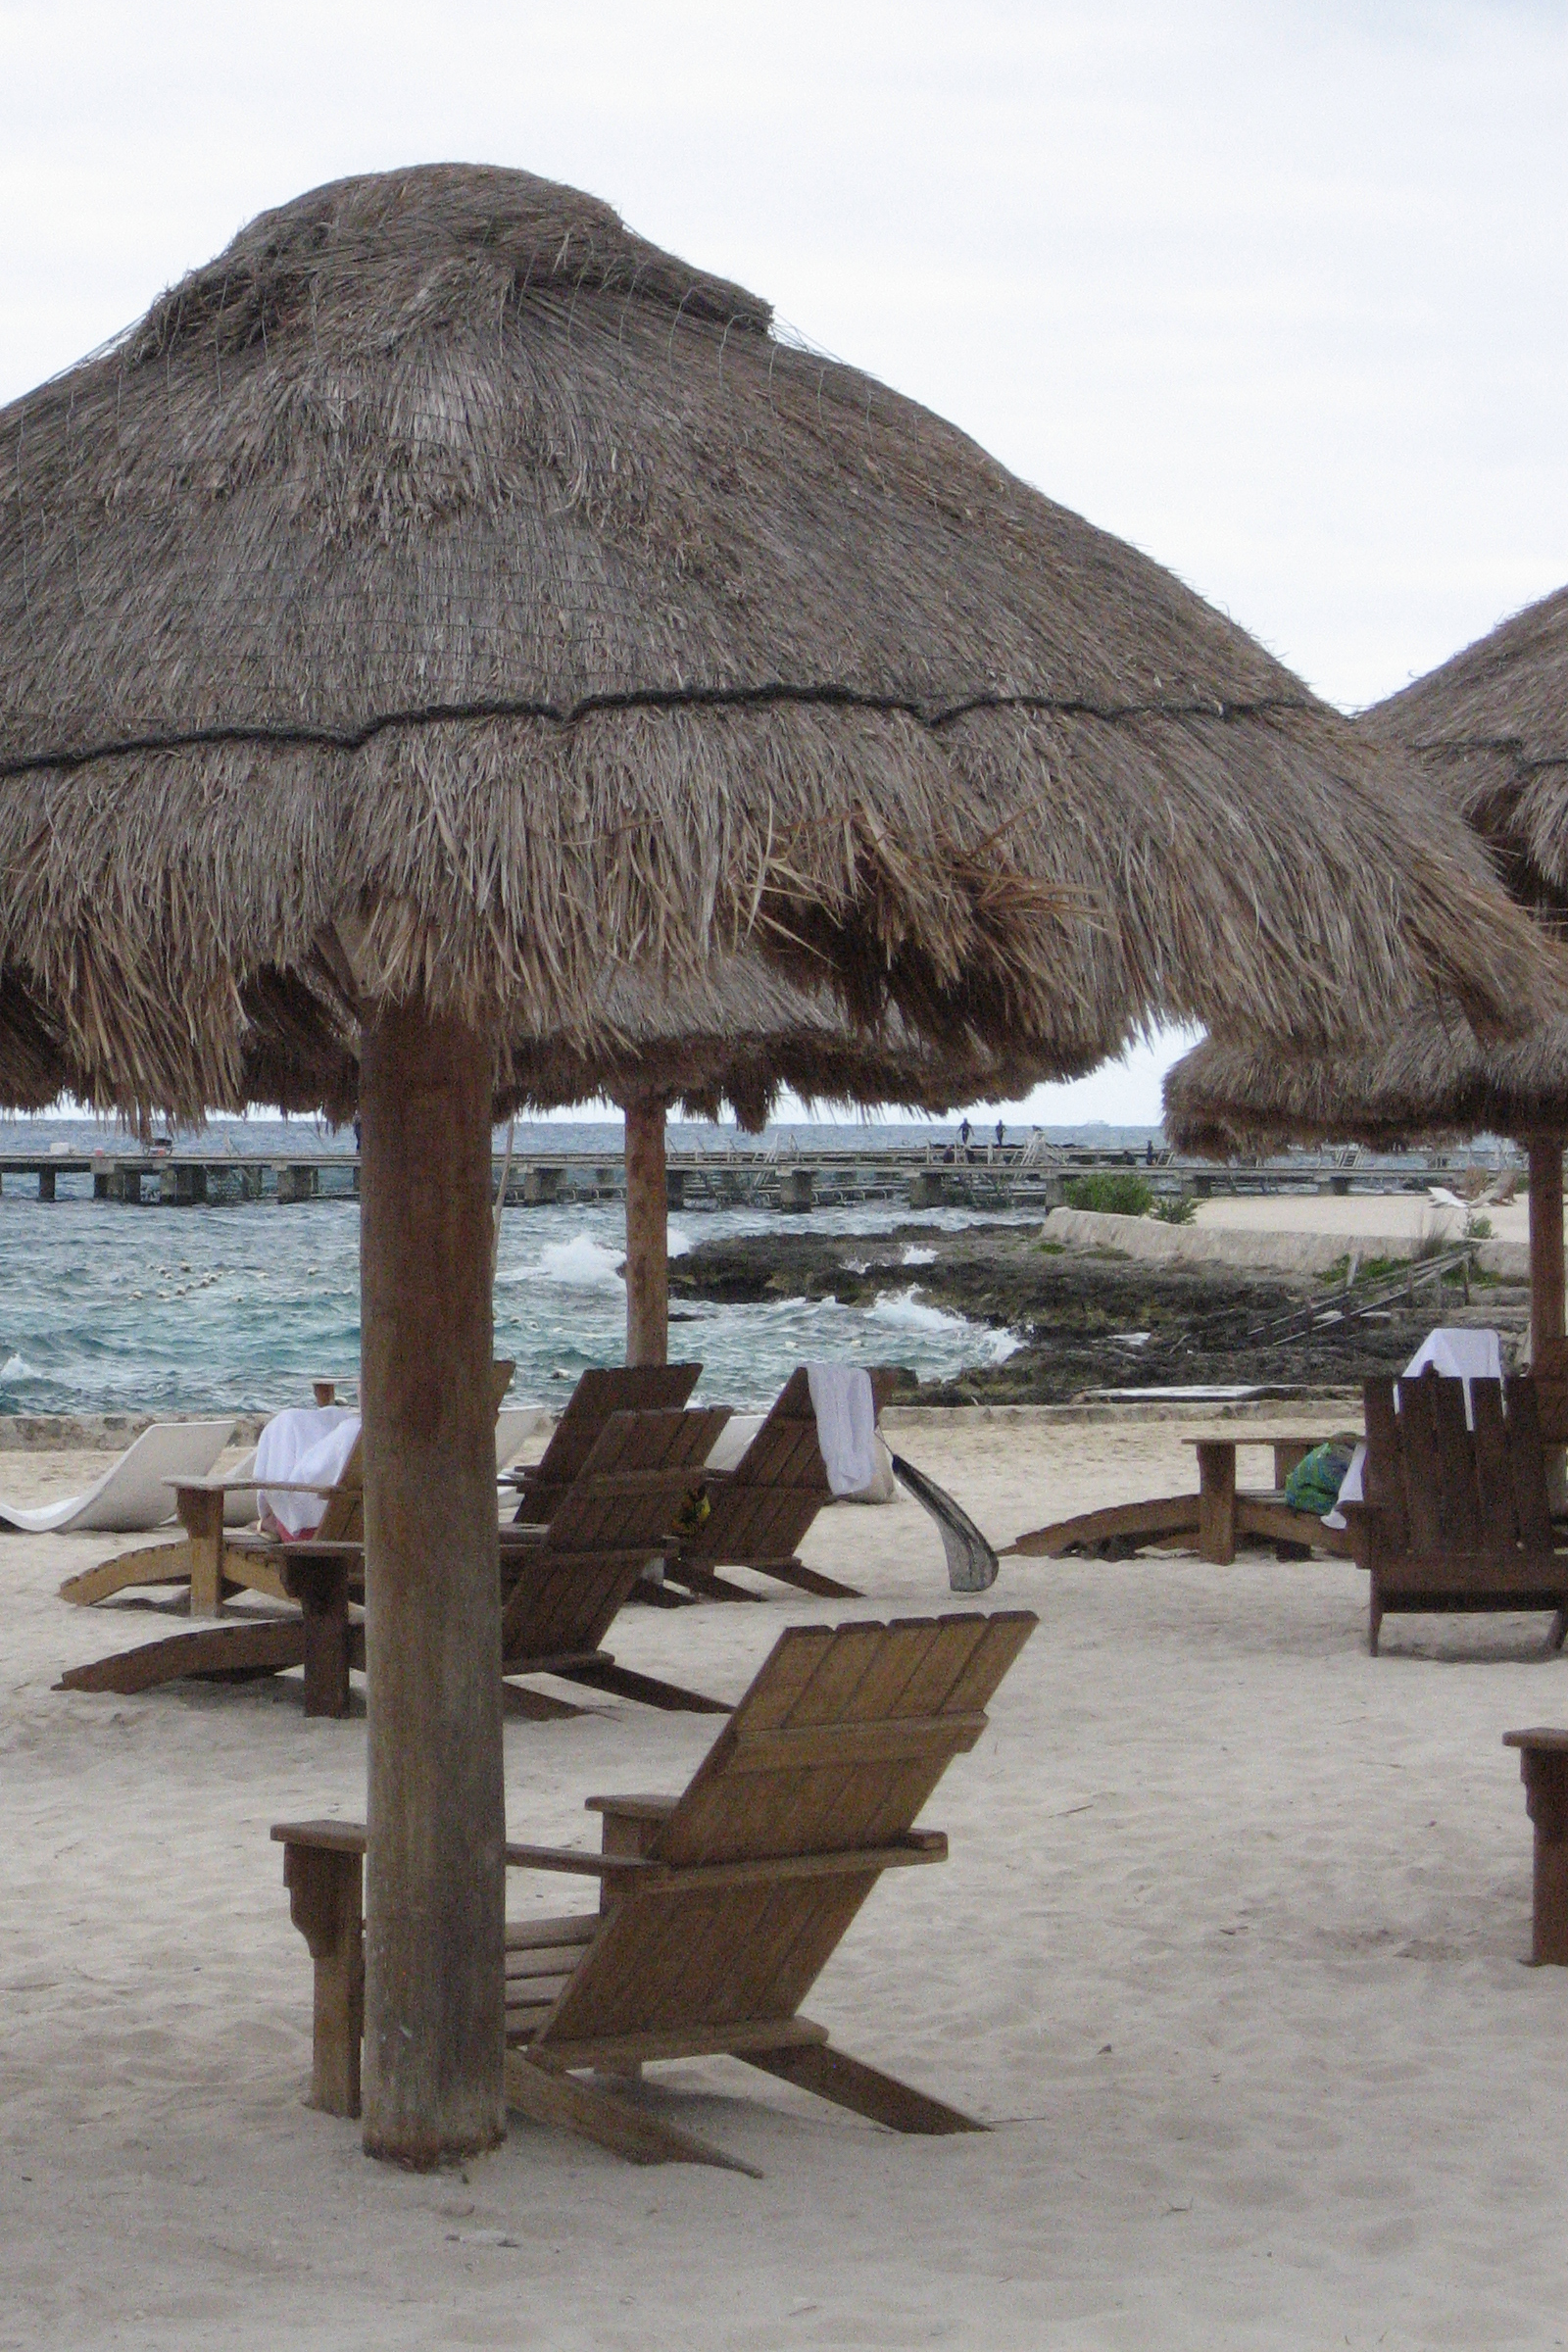 Enjoy the beaches of Cancun, Mexico! Visit EnjoyVacationing.com to learn more!